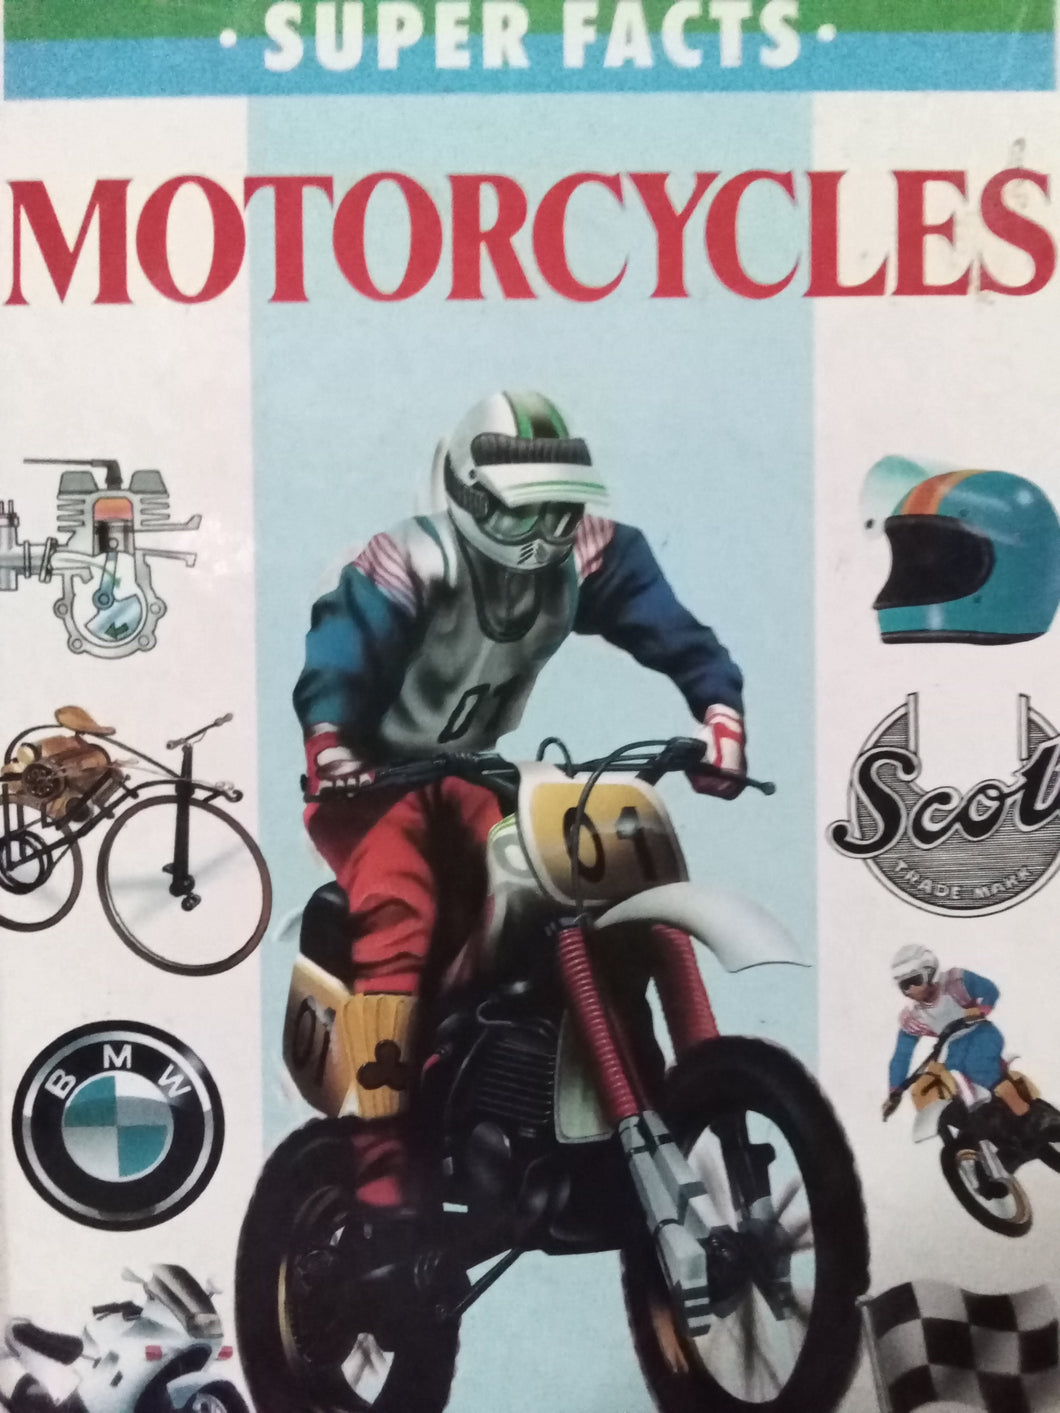 Super Facts: Motorcycles